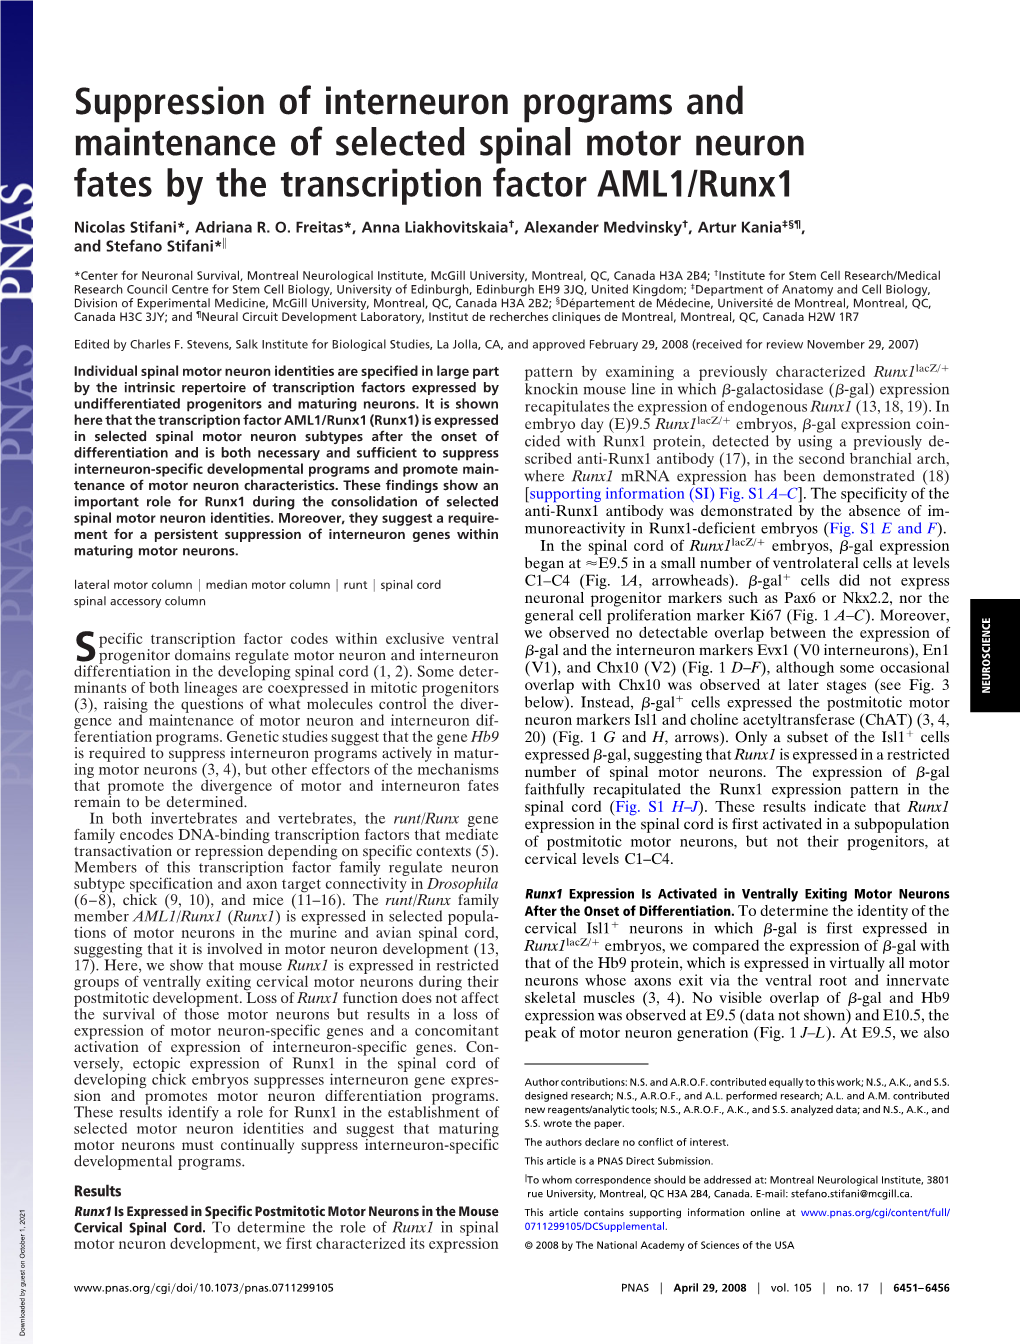 Suppression of Interneuron Programs and Maintenance of Selected Spinal Motor Neuron Fates by the Transcription Factor AML1/Runx1